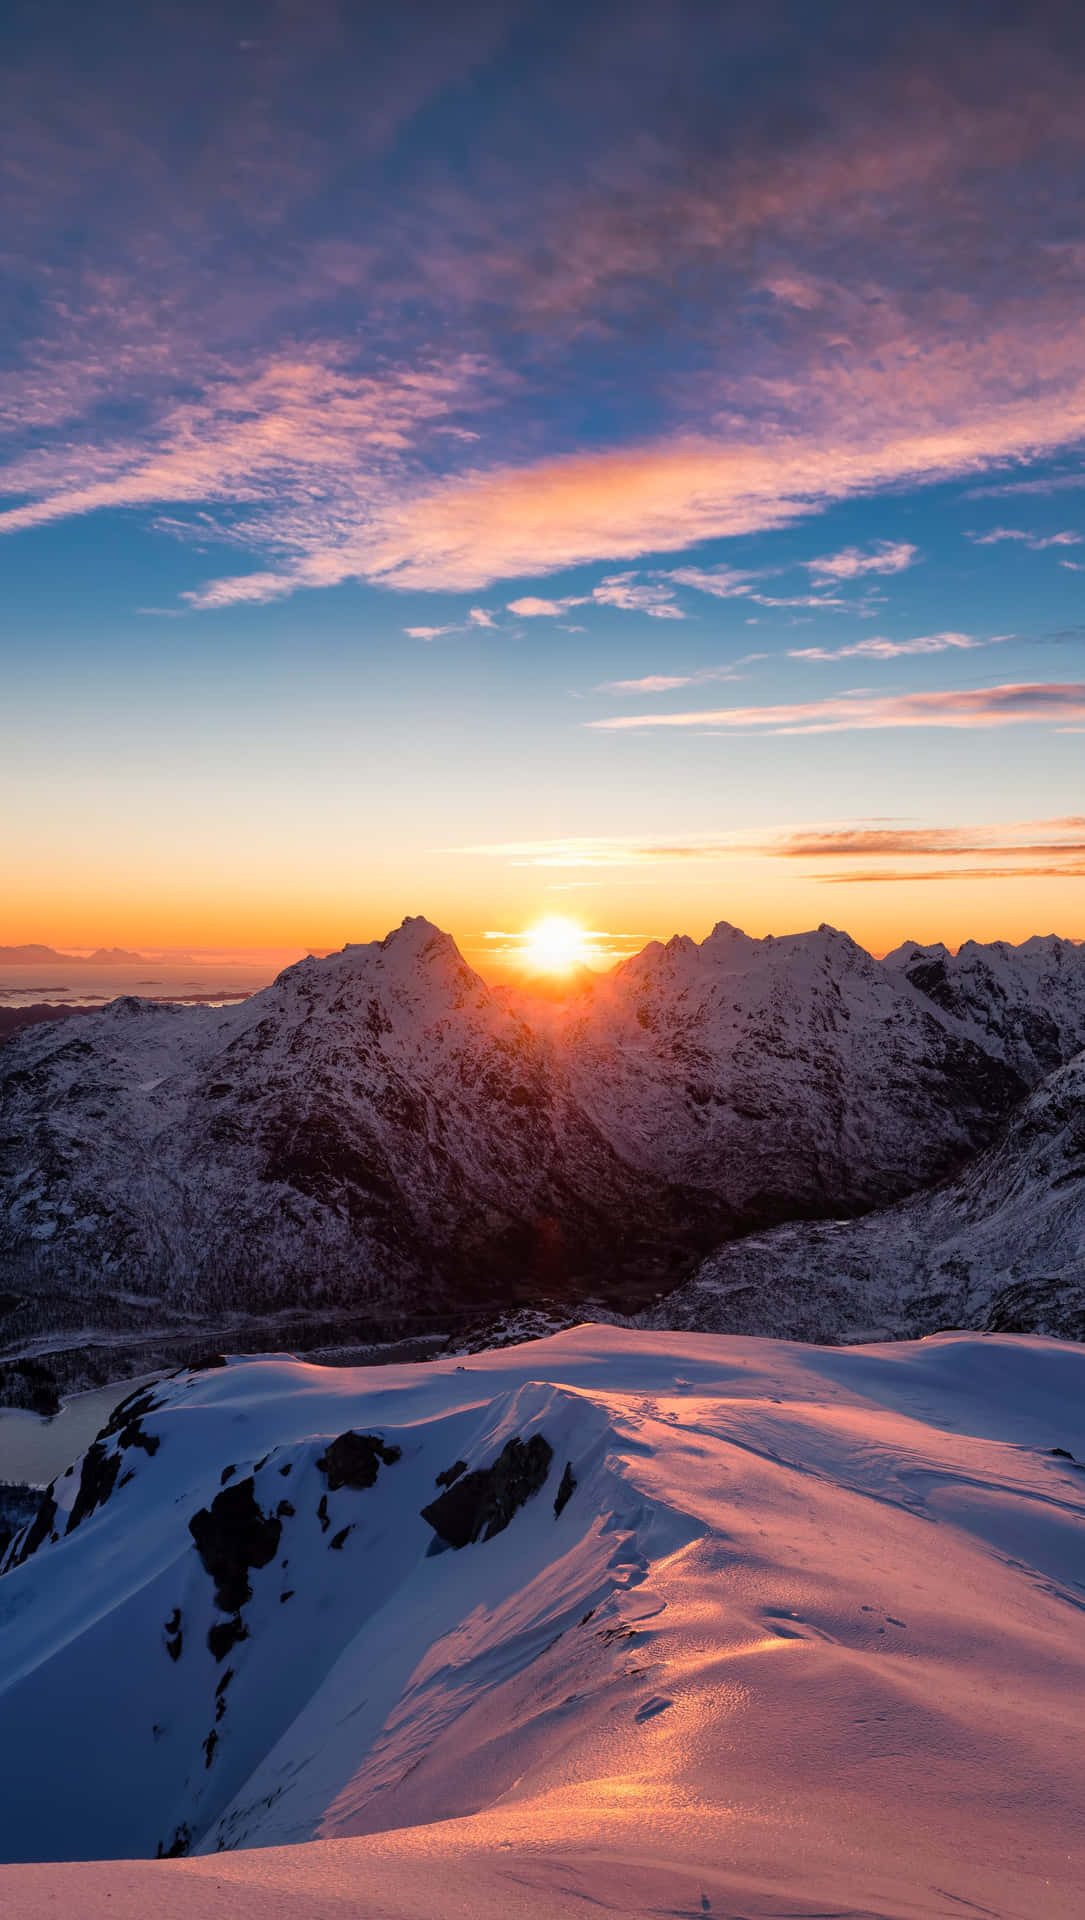 Norway Snowy Mountains Sunset View Wallpaper